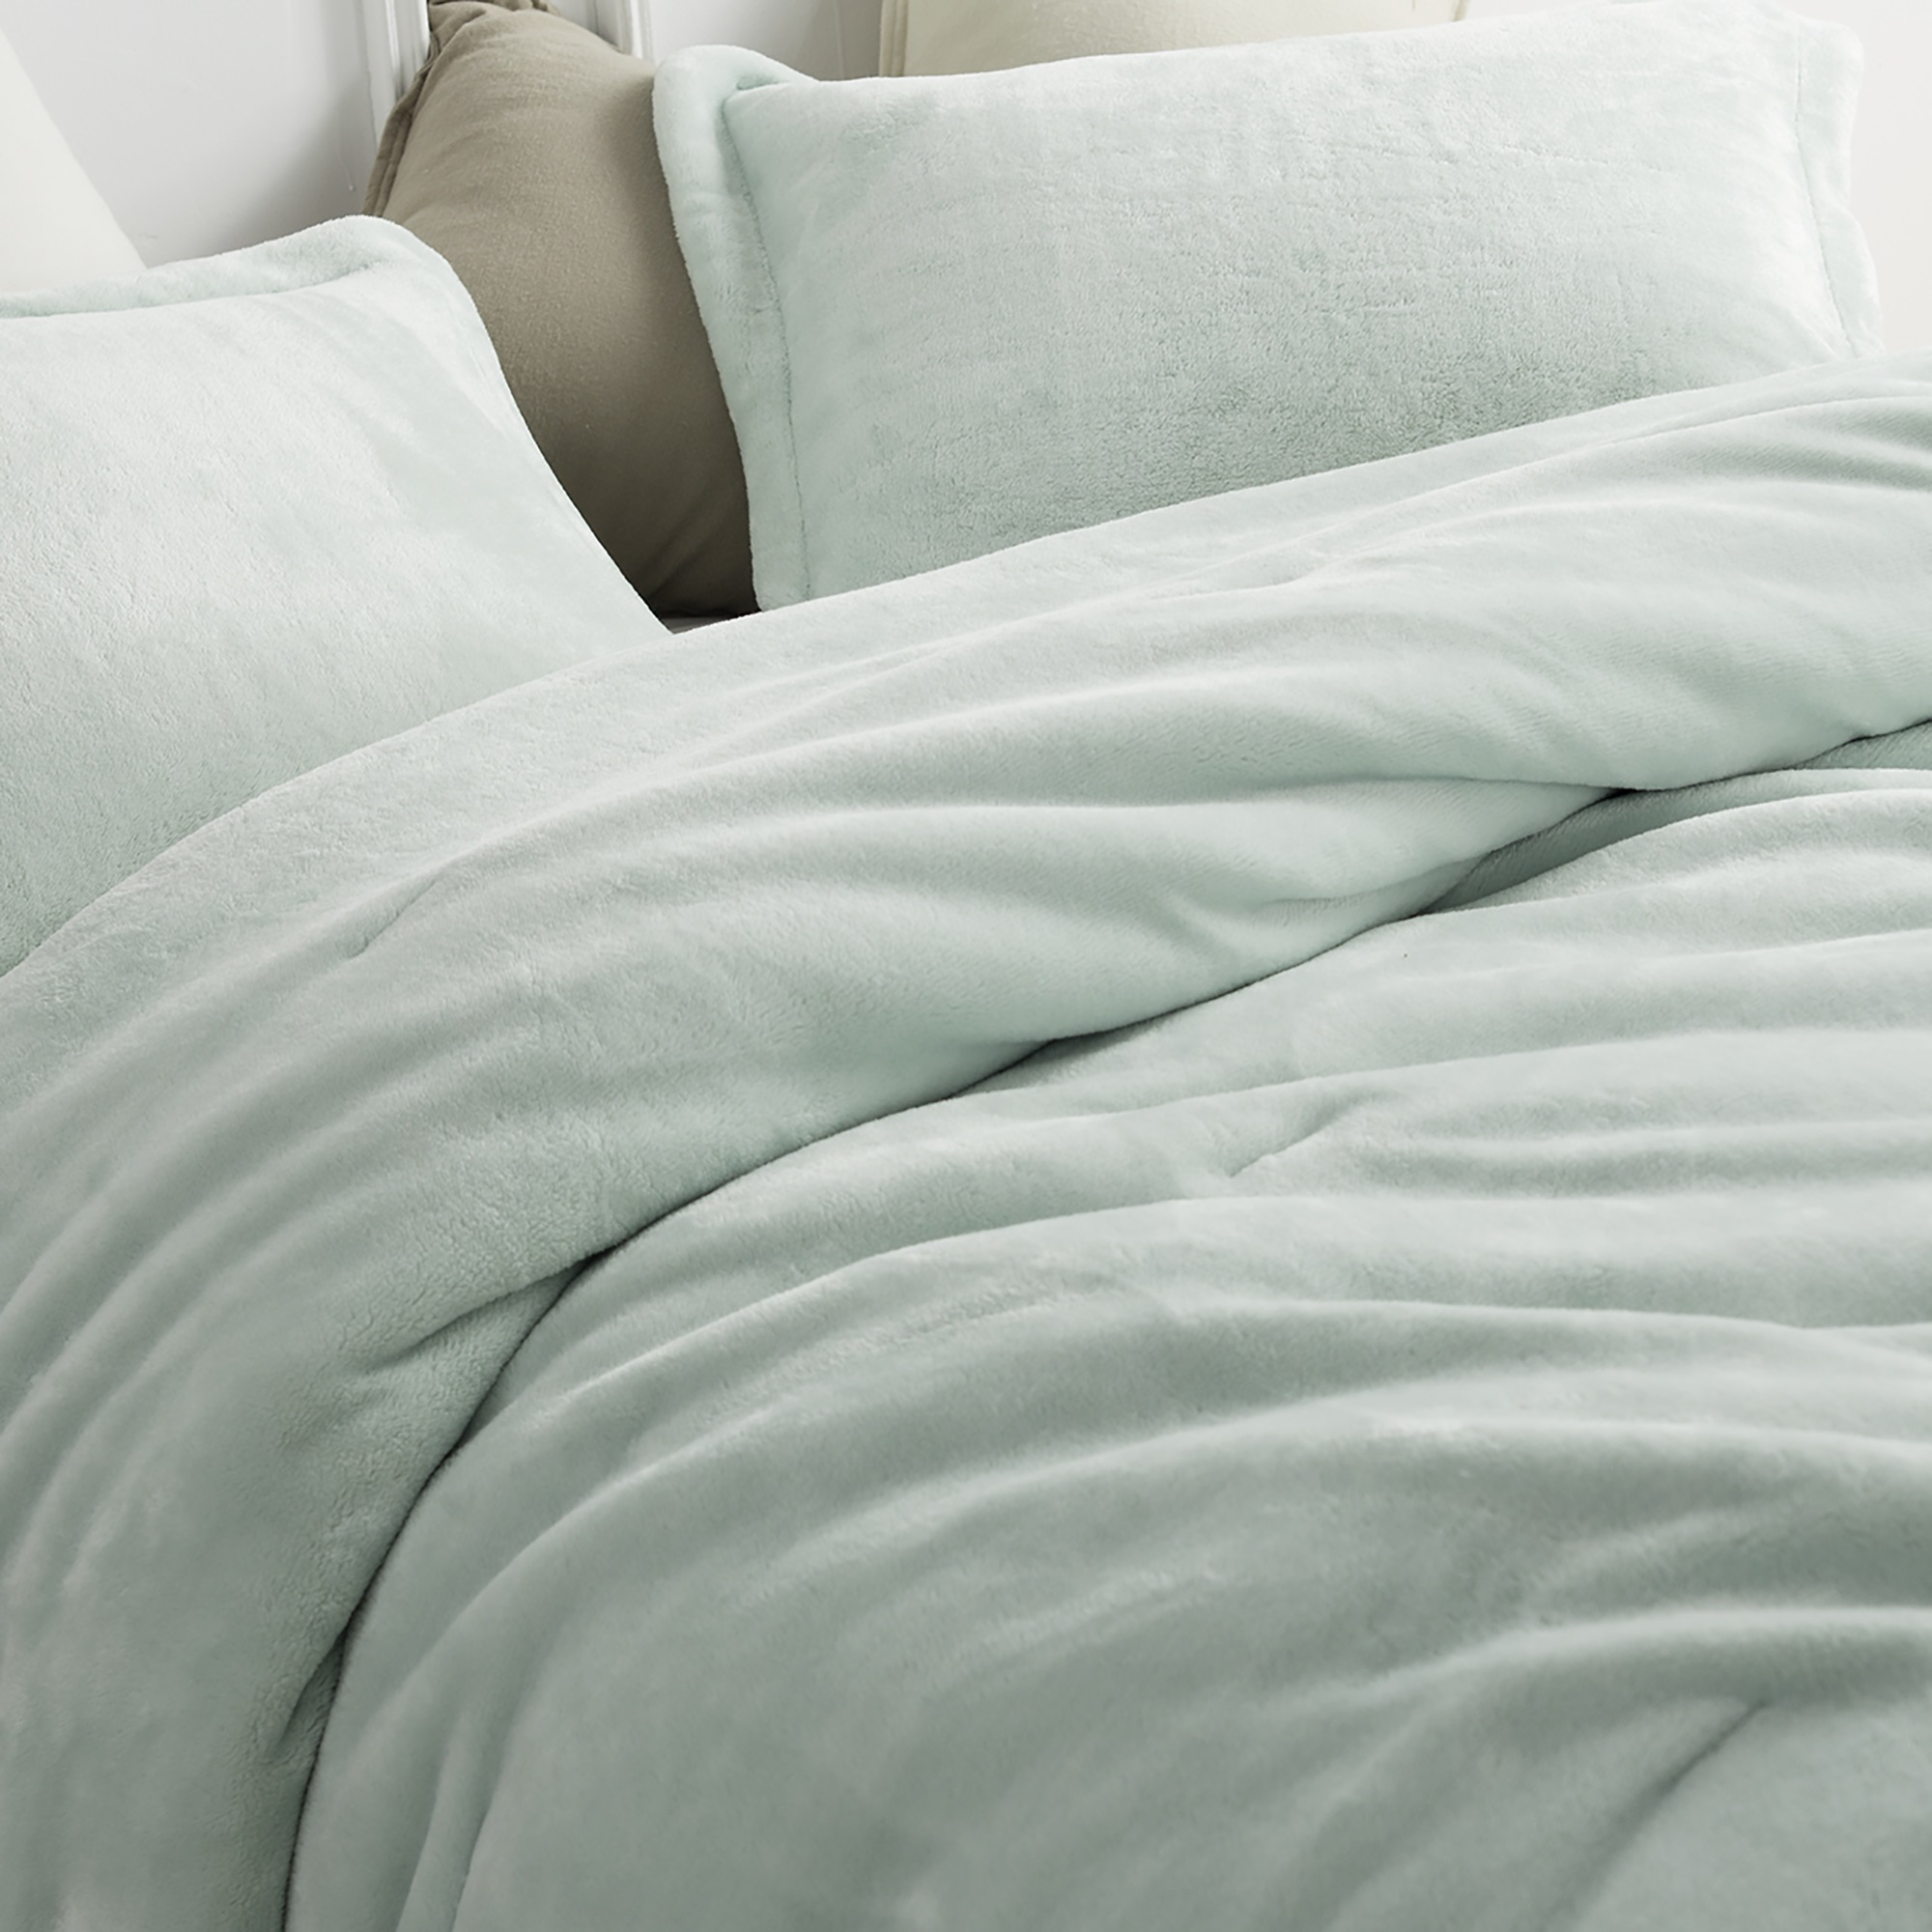 Coma Inducer Oversized Comforter - Me Sooo Comfy - Hint of Mint